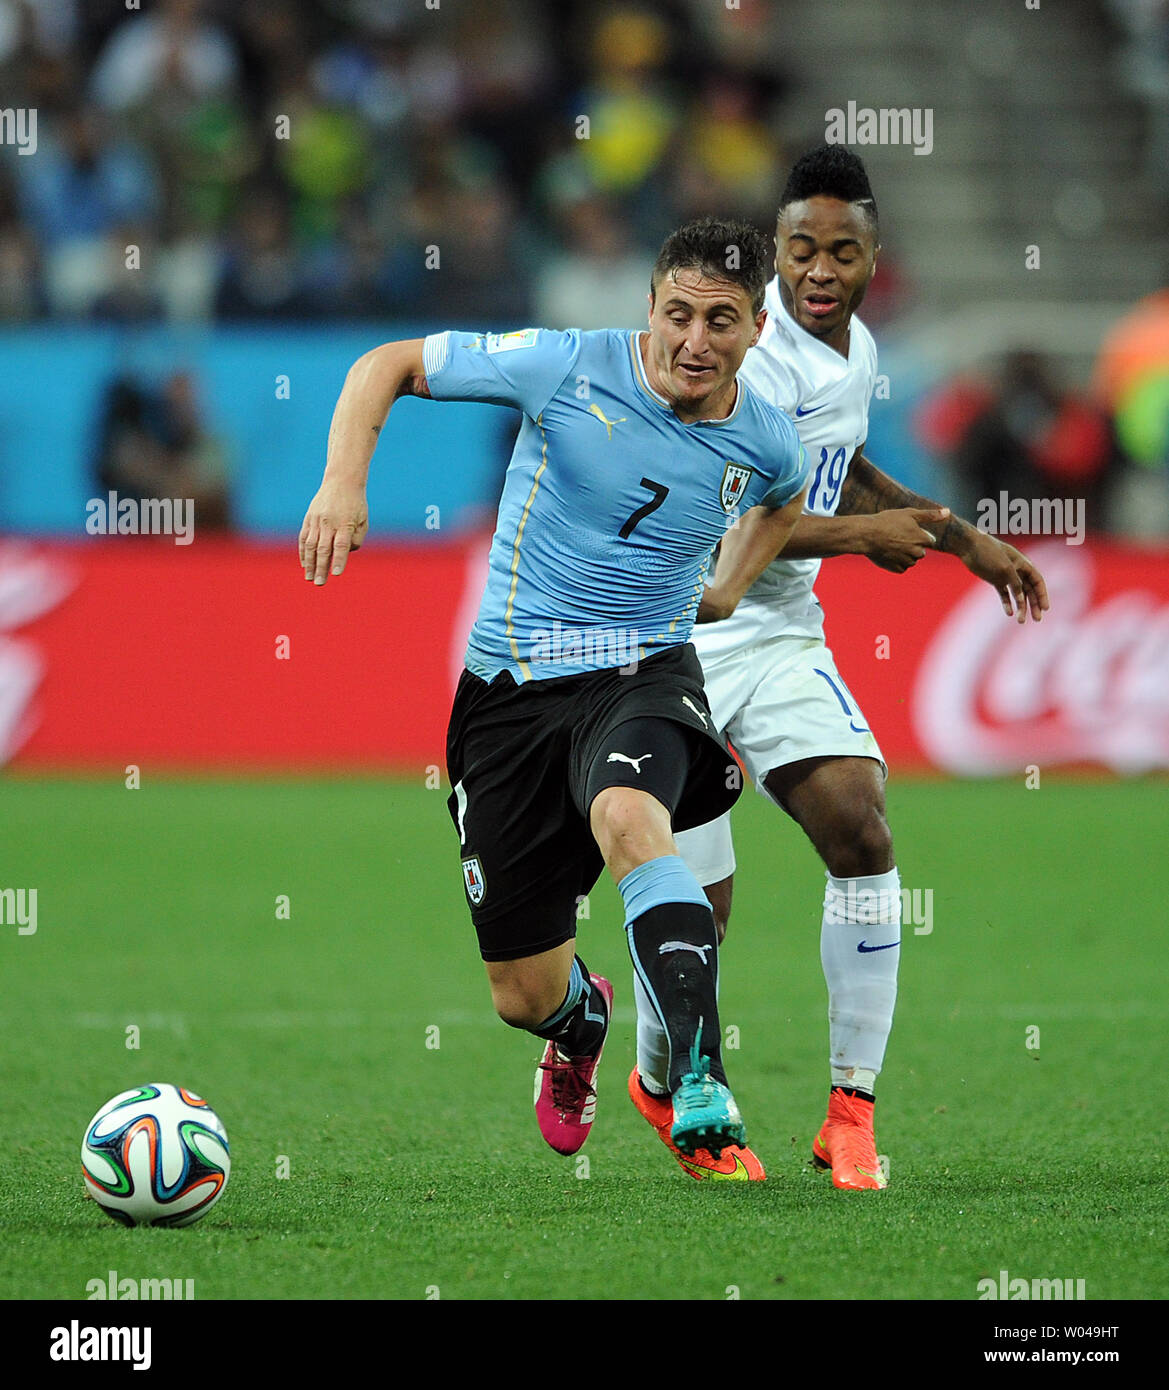 Cristian Rodriguez (L) of Uruguay competes with Raheem Sterling of England during the 2014 FIFA World Cup Group D match at the Arena Corinthians in Sao Paulo, Brazil on June 19, 2014. UPI/Chris Brunskill Stock Photo